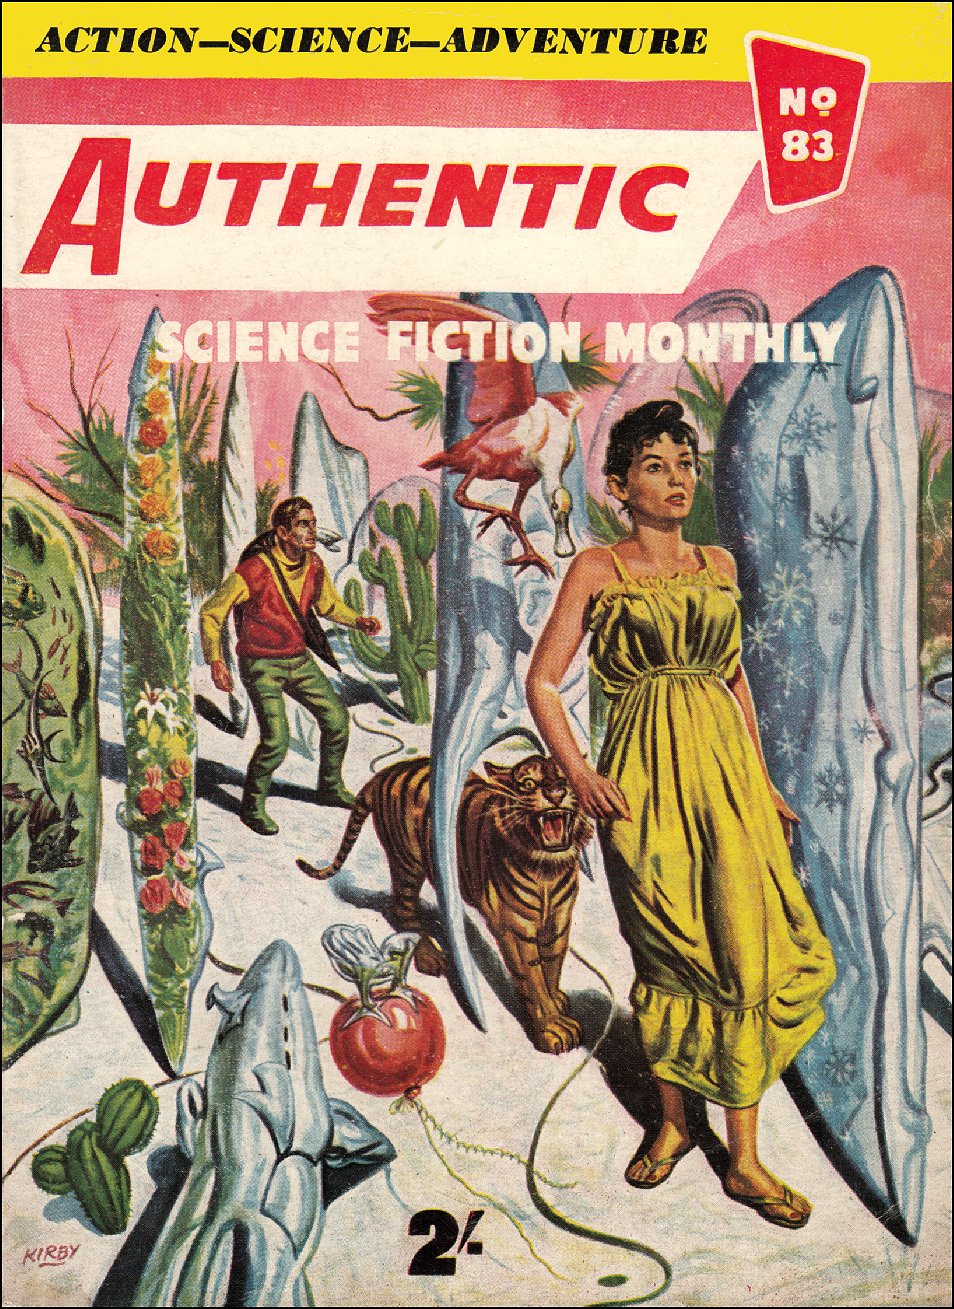 Authentic Science Fiction Monthly Number 83